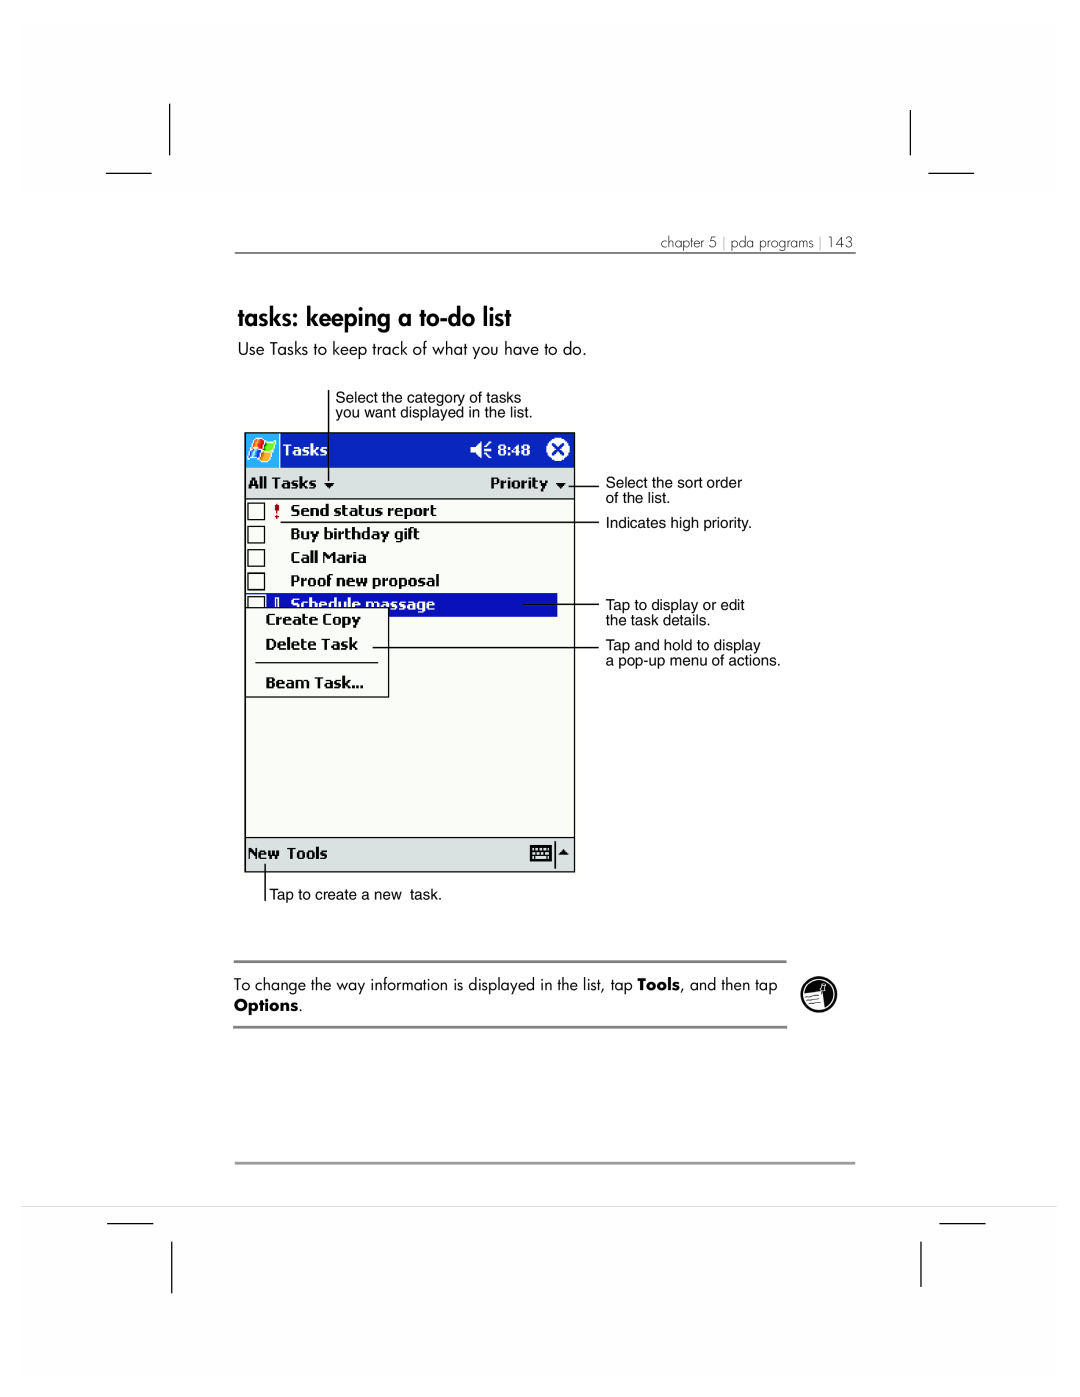 HP 920 manual tasks keeping a to-do list, Use Tasks to keep track of what you have to do 